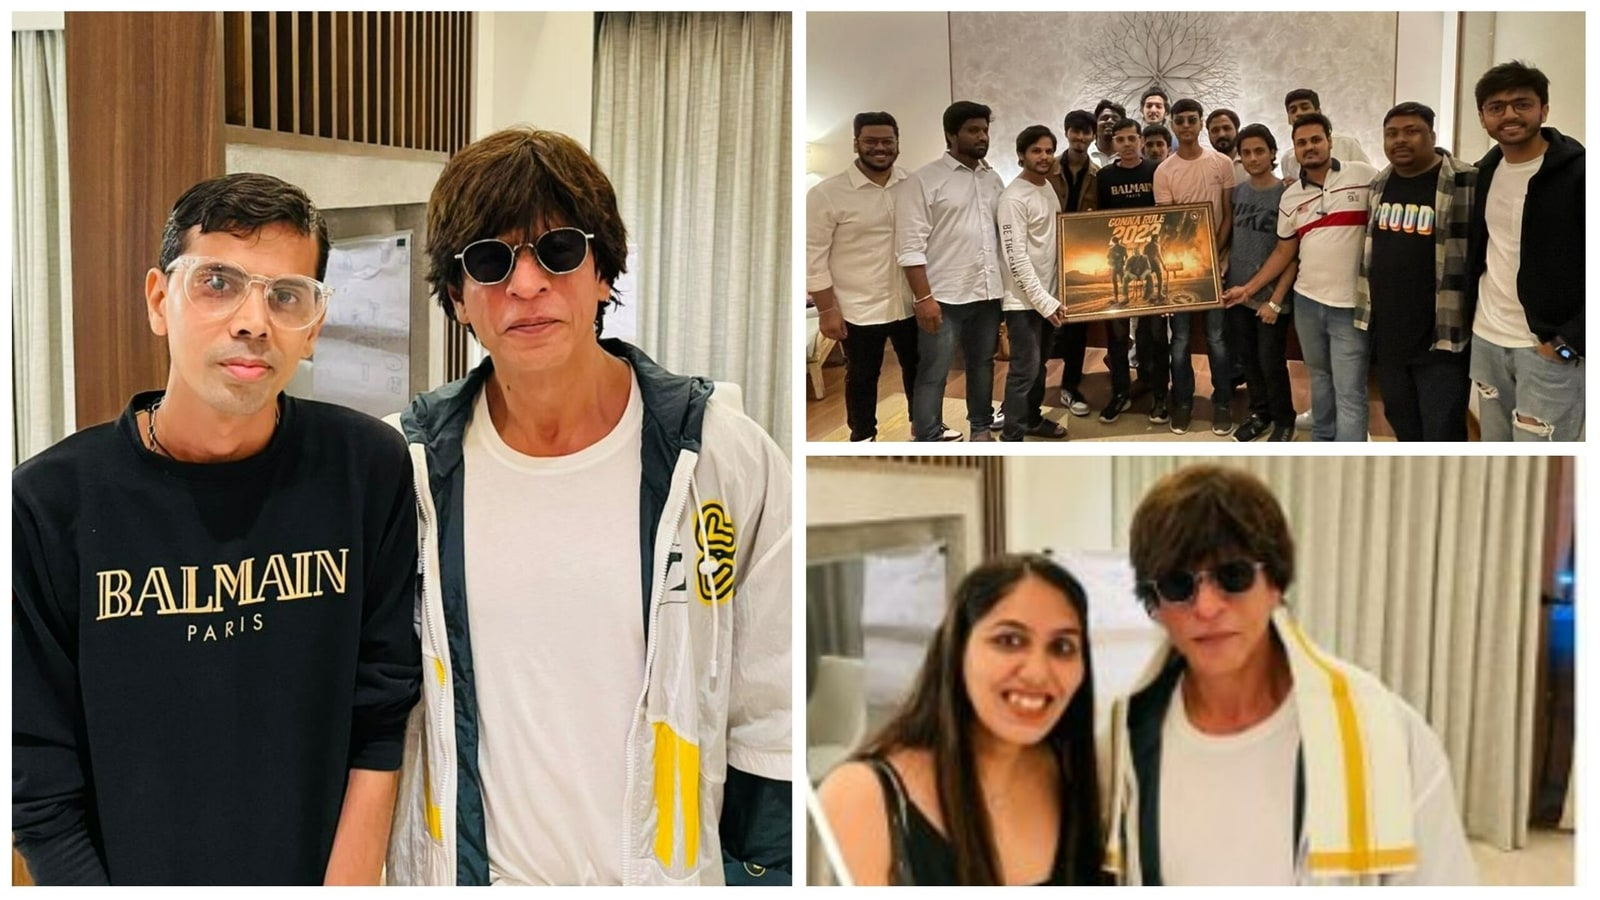 shah-rukh-khan-books-fans-five-star-hotel-rooms-in-chennai-for-meet-and-greet-two-butlers-were-allotted-to-us